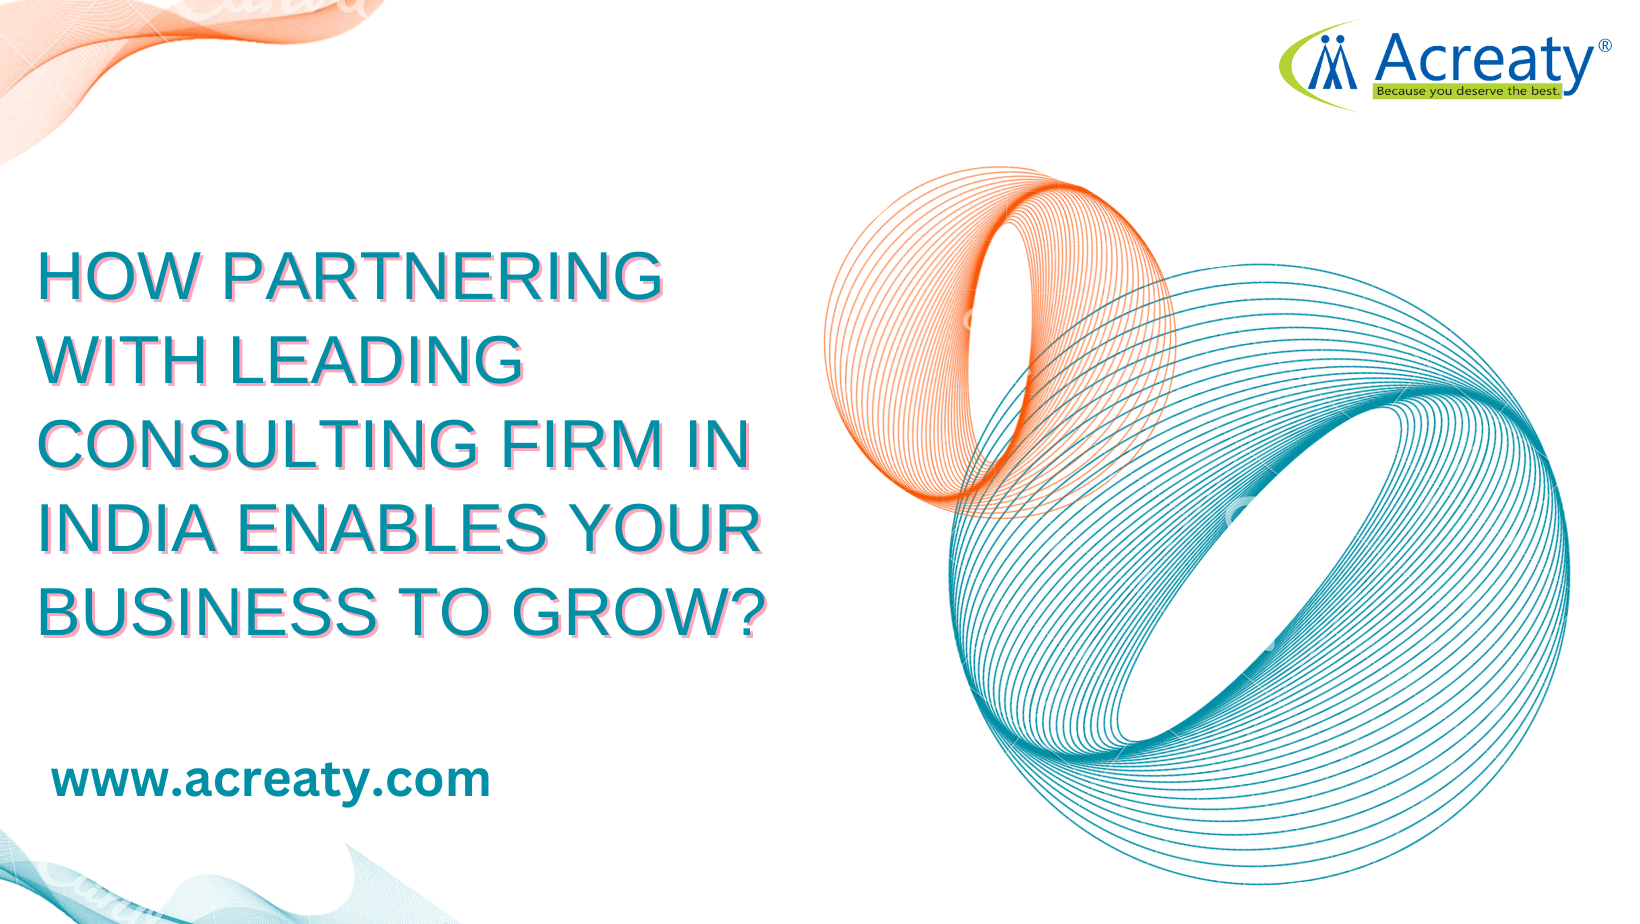 How partnering with leading consulting firm in India enables your business to grow?